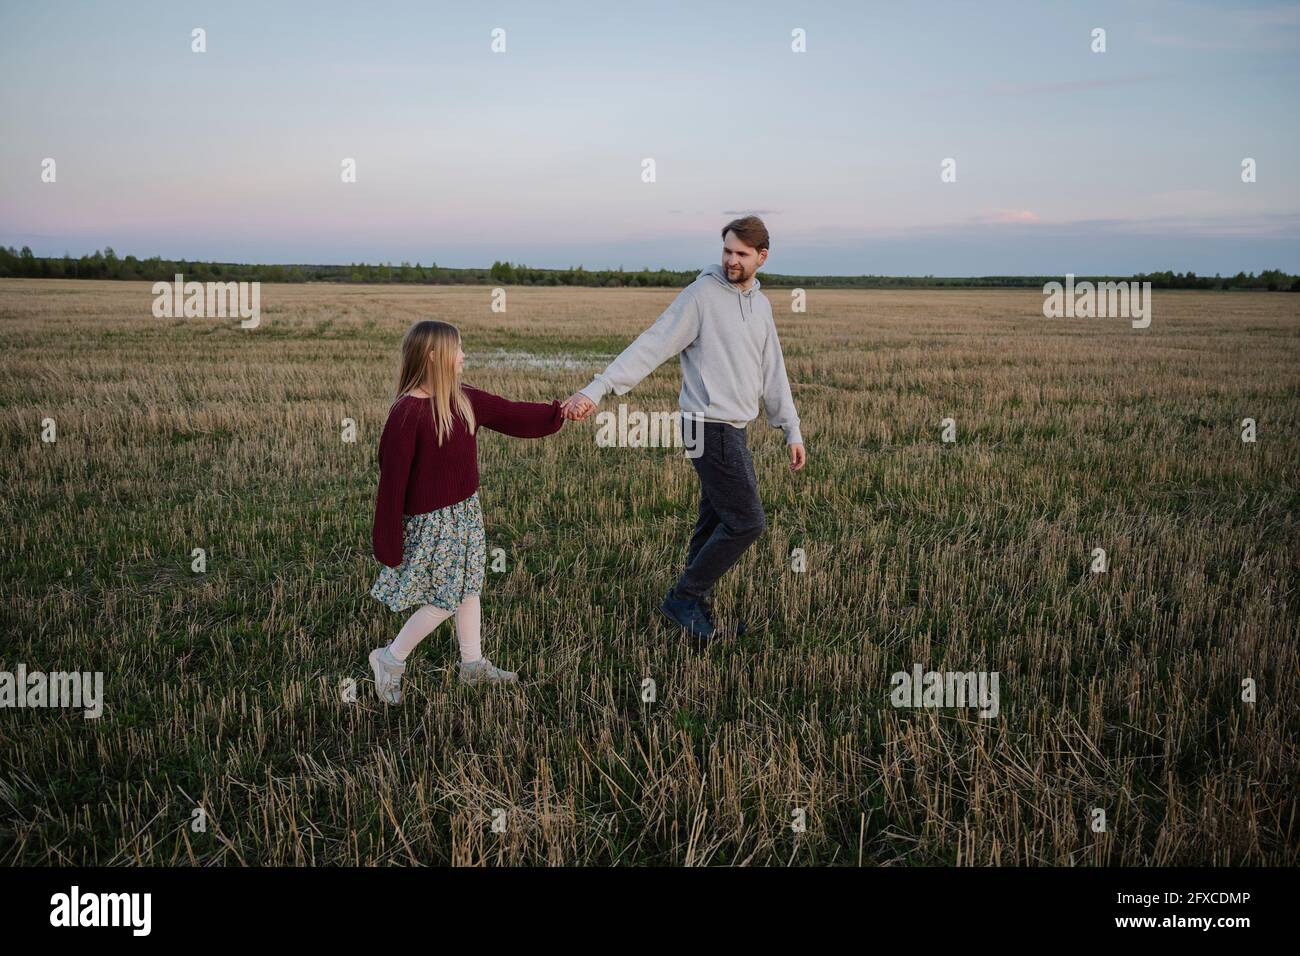 Father and daughter holding hands while walking in agricultural field Stock Photo